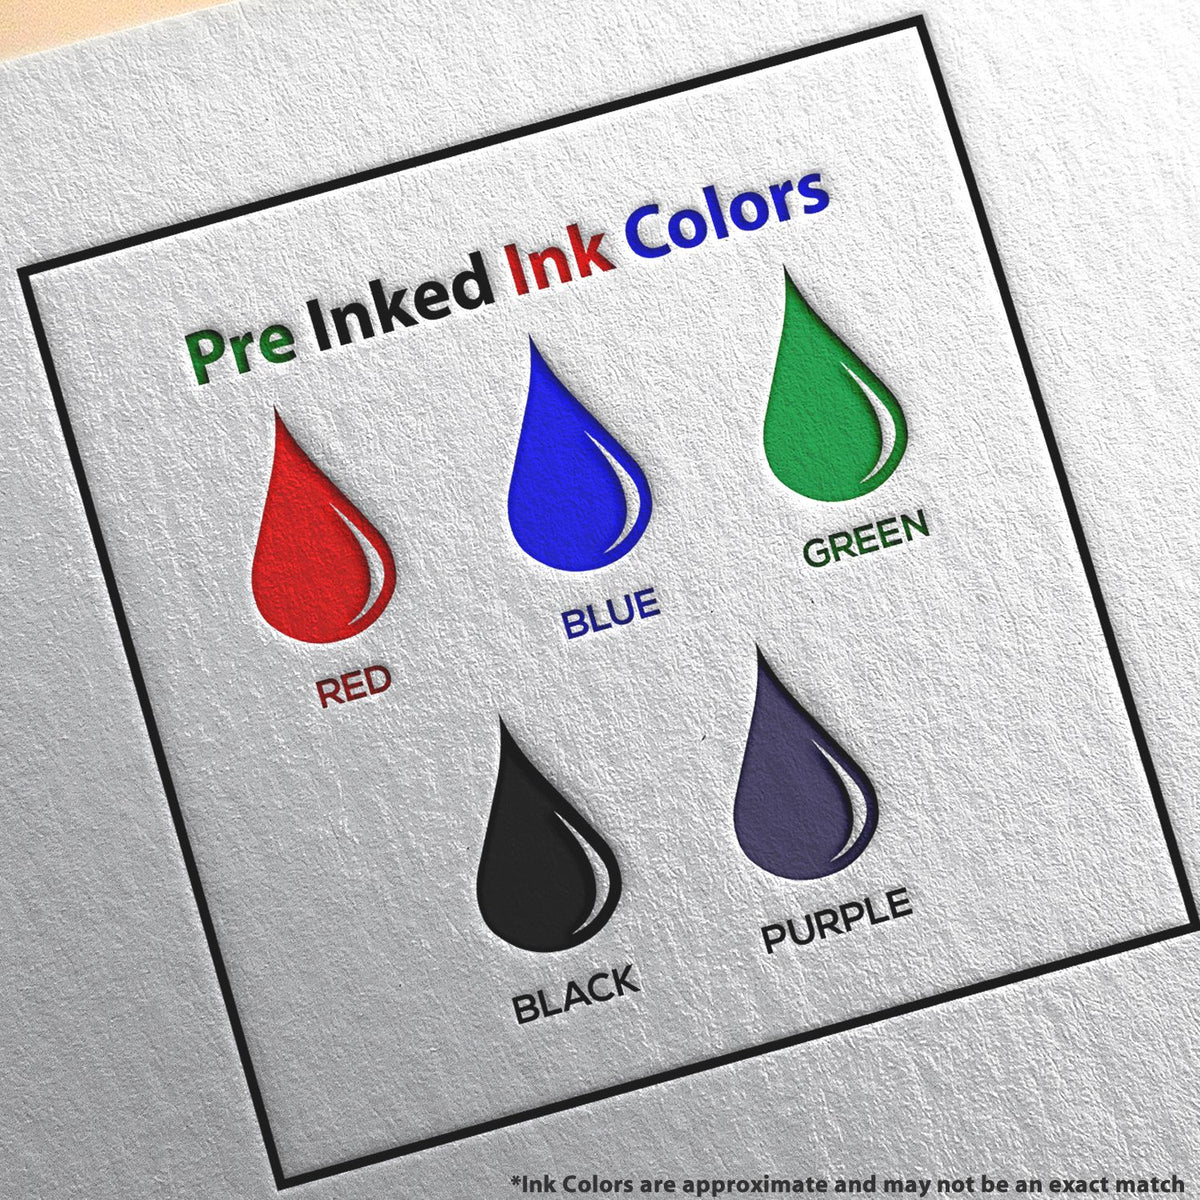 A picture showing the different ink colors or hues available for the Slim Pre-Inked South Carolina Professional Geologist Seal Stamp